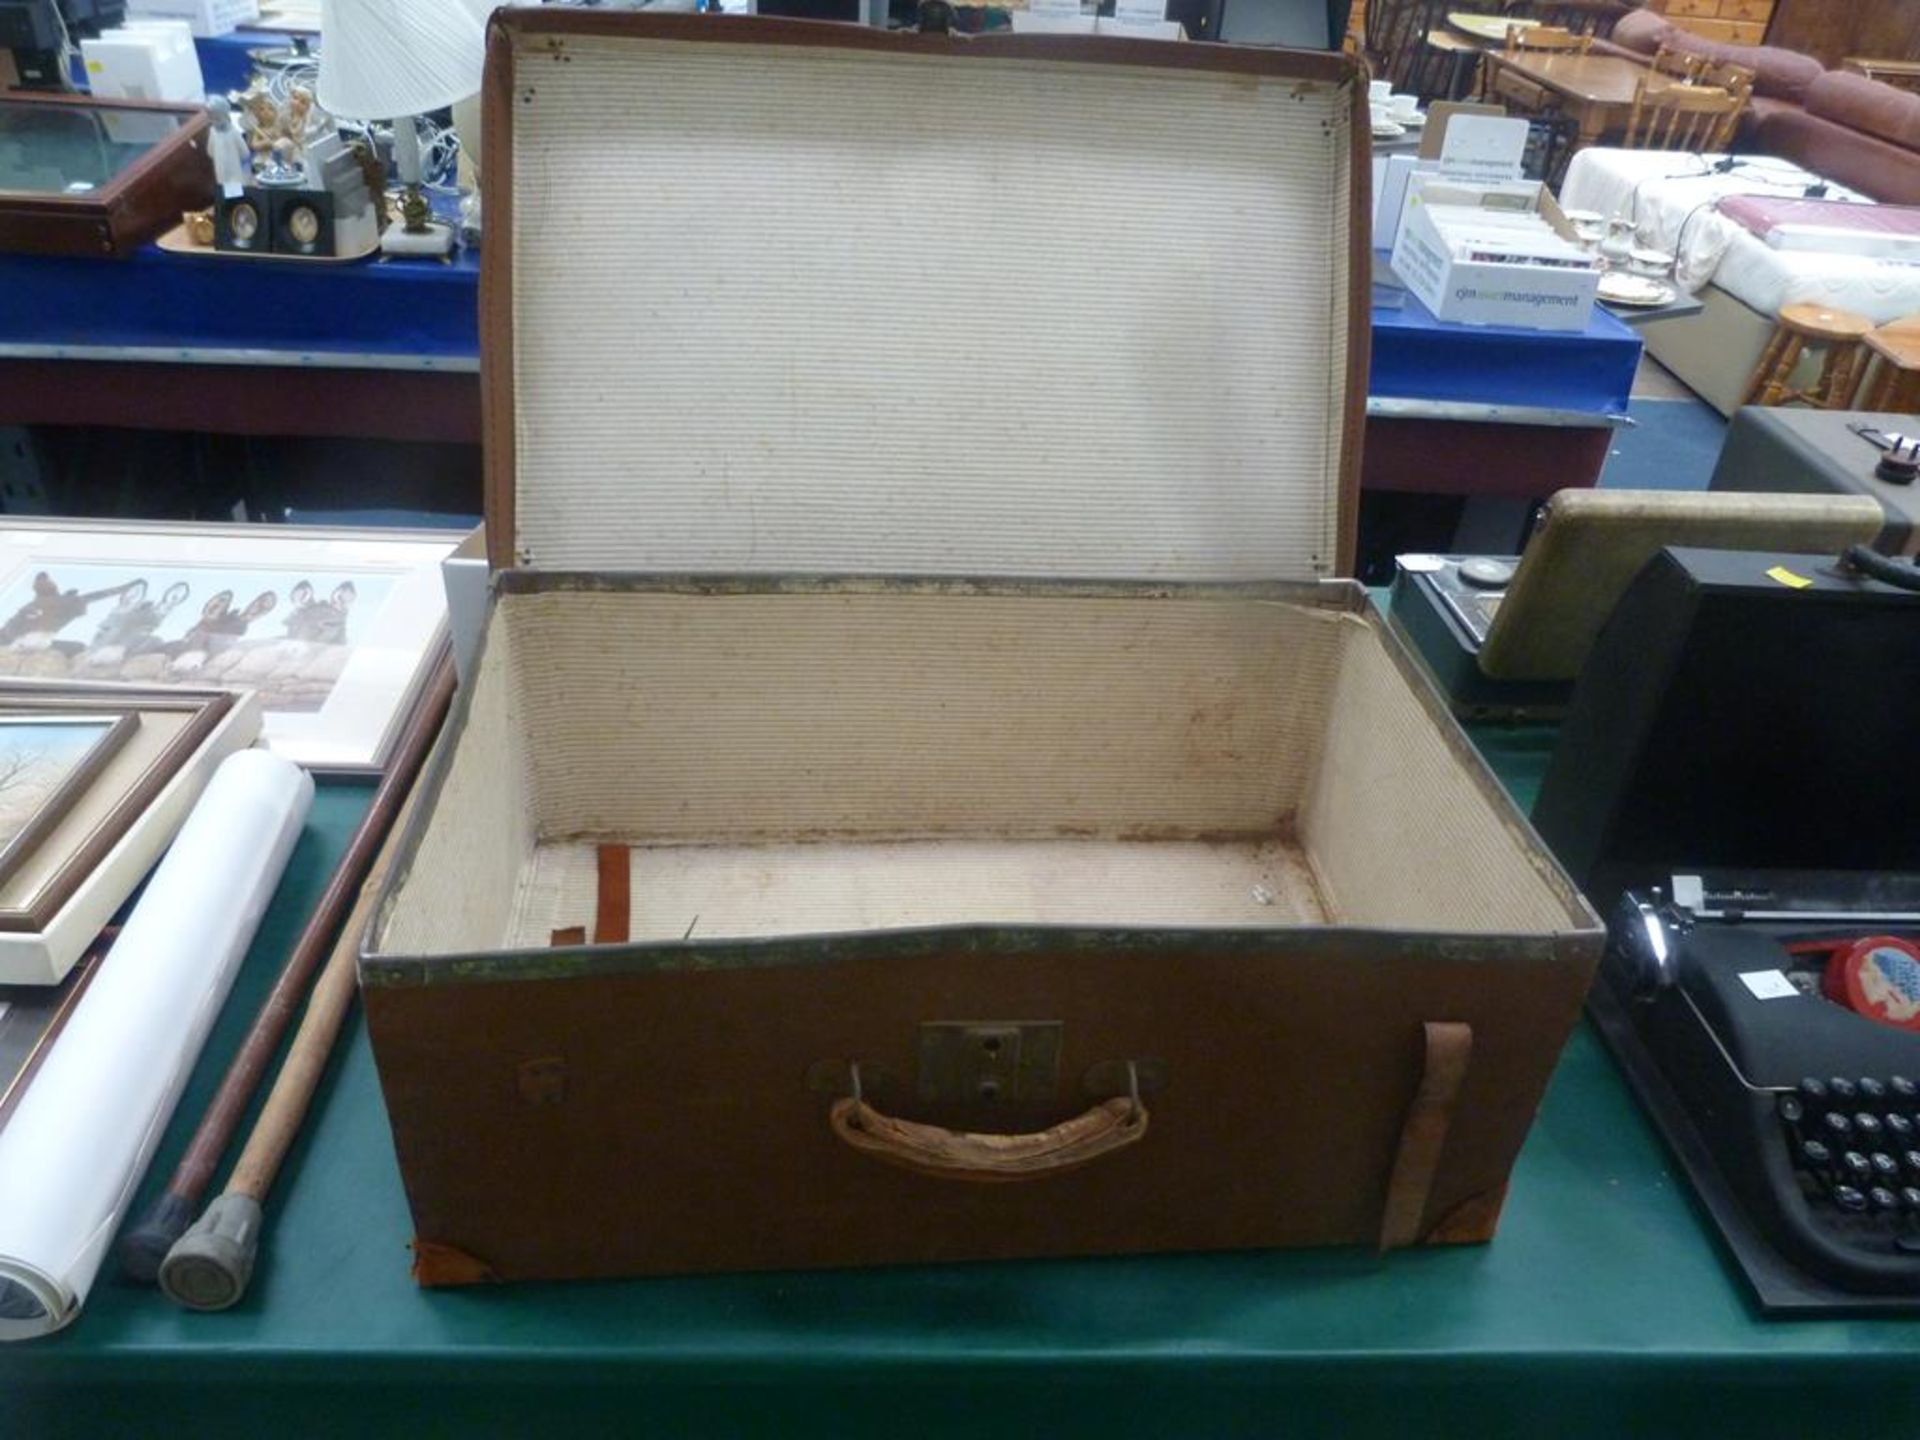 An Early Trunk Suitcase with Reinforced Corners (H21cm, W62cm, D42cm) (Est.£20-£40) - Image 6 of 6